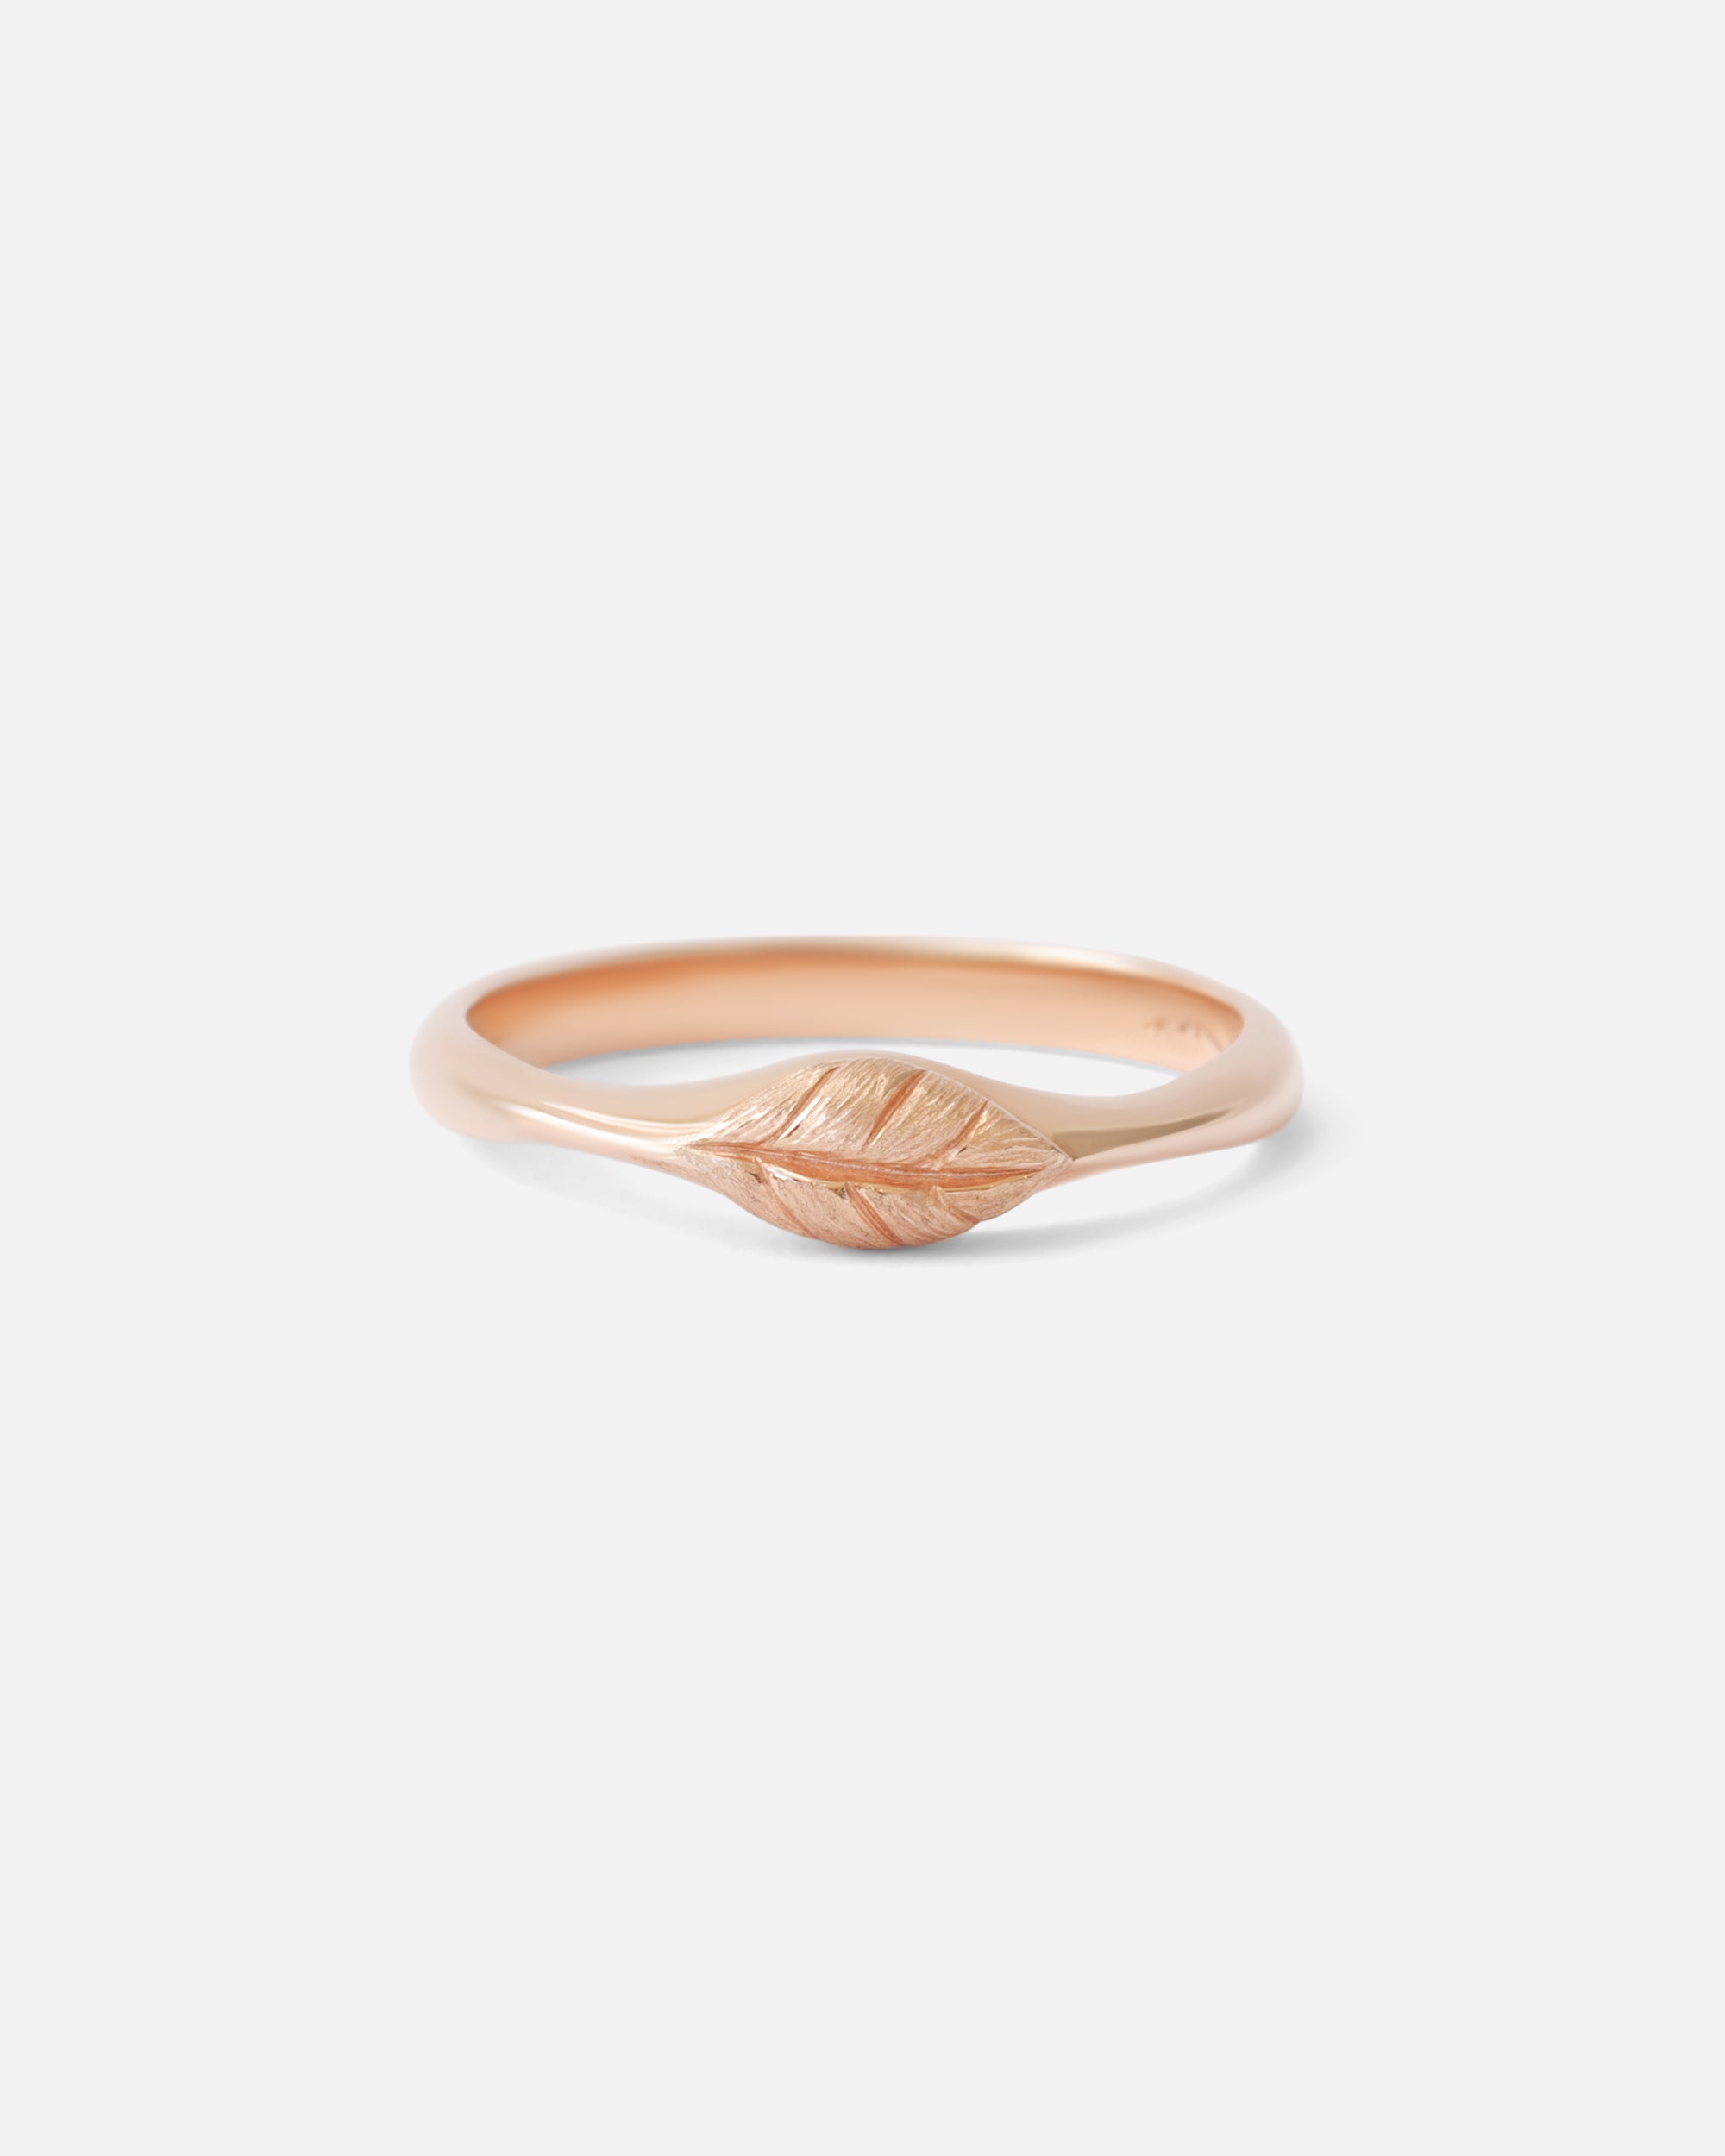 Single Leaf Stacker / Ring By O Channell Designs